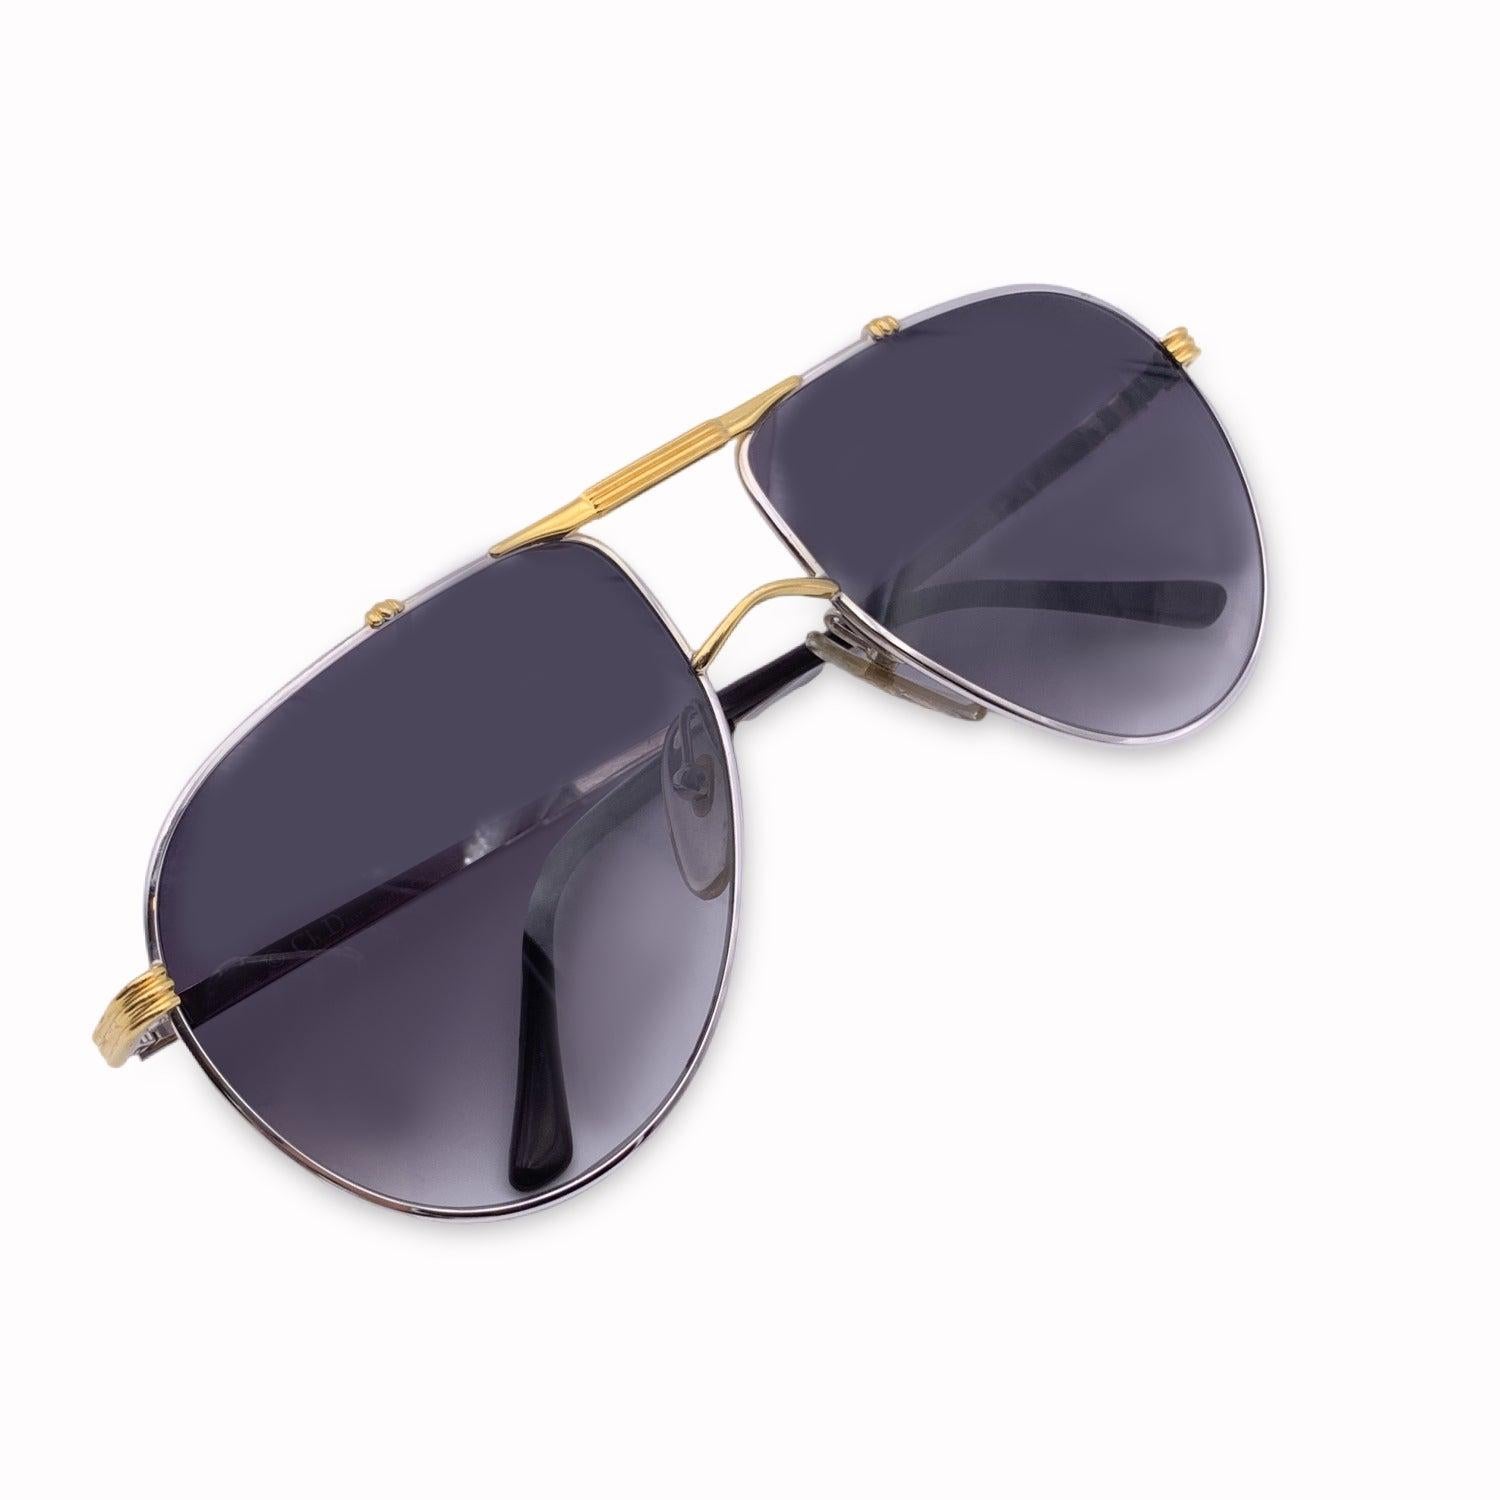 Vintage Christian Dior Monsieur Unisex Sunglasses, 2248 74. Size: 58/17 130mm. Silver metal frame, with gold details on sides and between lenses. CD logo on temples. 100% Total UVA/UVB protection. Grey gradient lenses. Details MATERIAL: Metal COLOR: